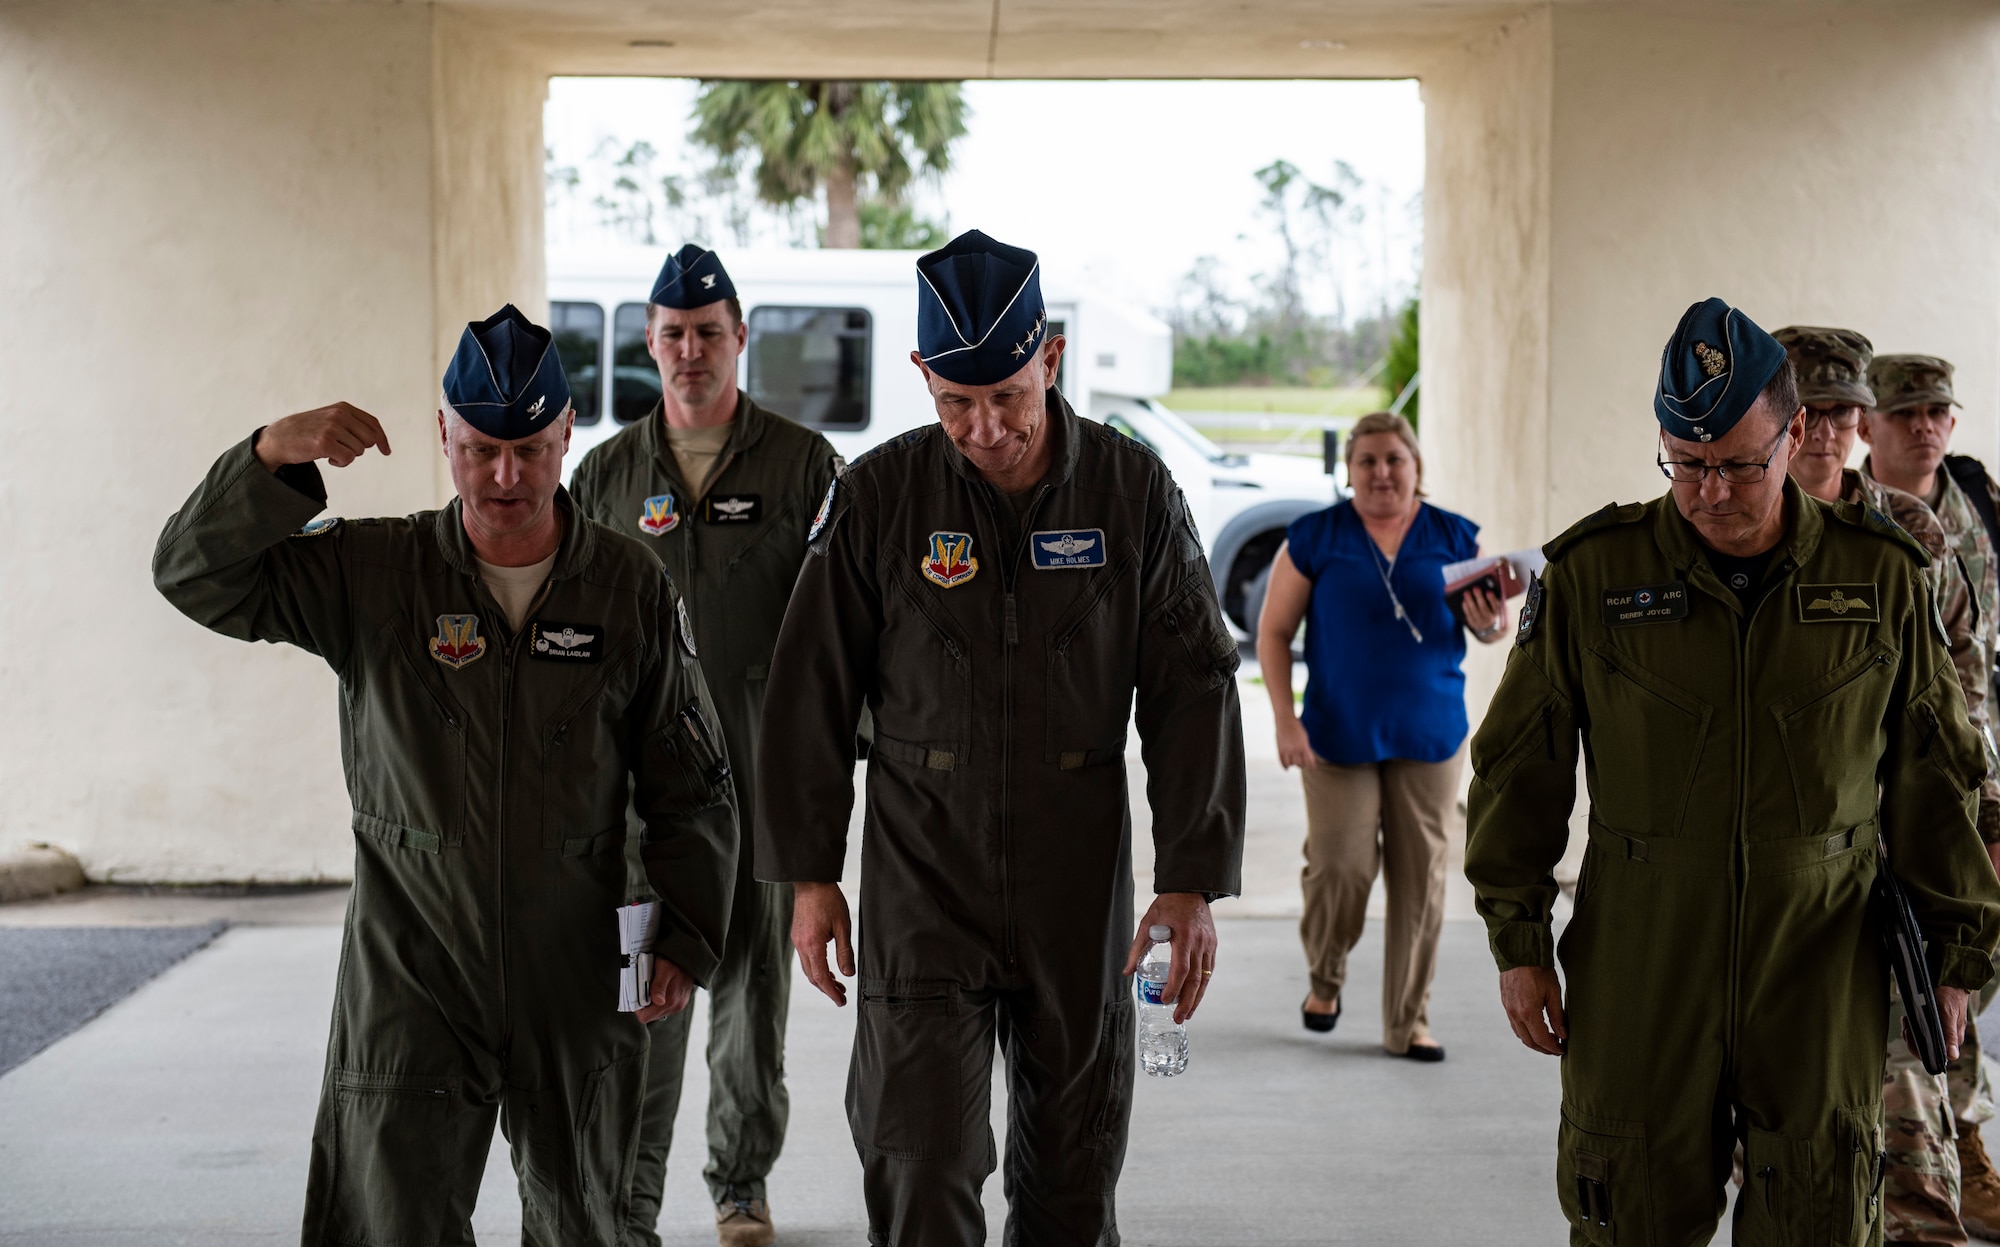 U.S. Air Force Col. Brian Laidlaw, 325th Fighter Wing commander (left), walks with U.S. Air Force Gen. Mike Holmes, the commander of Air Combat Command (center), and Royal Canadian Air Force Major-General Derek Joyce, Continental North American Aerospace Defense Command Region deputy commander (right), to a town hall at Tyndall Air Force Base, Florida, Feb. 25, 2020. Holmes outlined his vision for the future of Tyndall and how the base’s mission fits into ACC’s priorities. (U.S. Air Force photo by Staff Sgt. Magen M. Reeves)